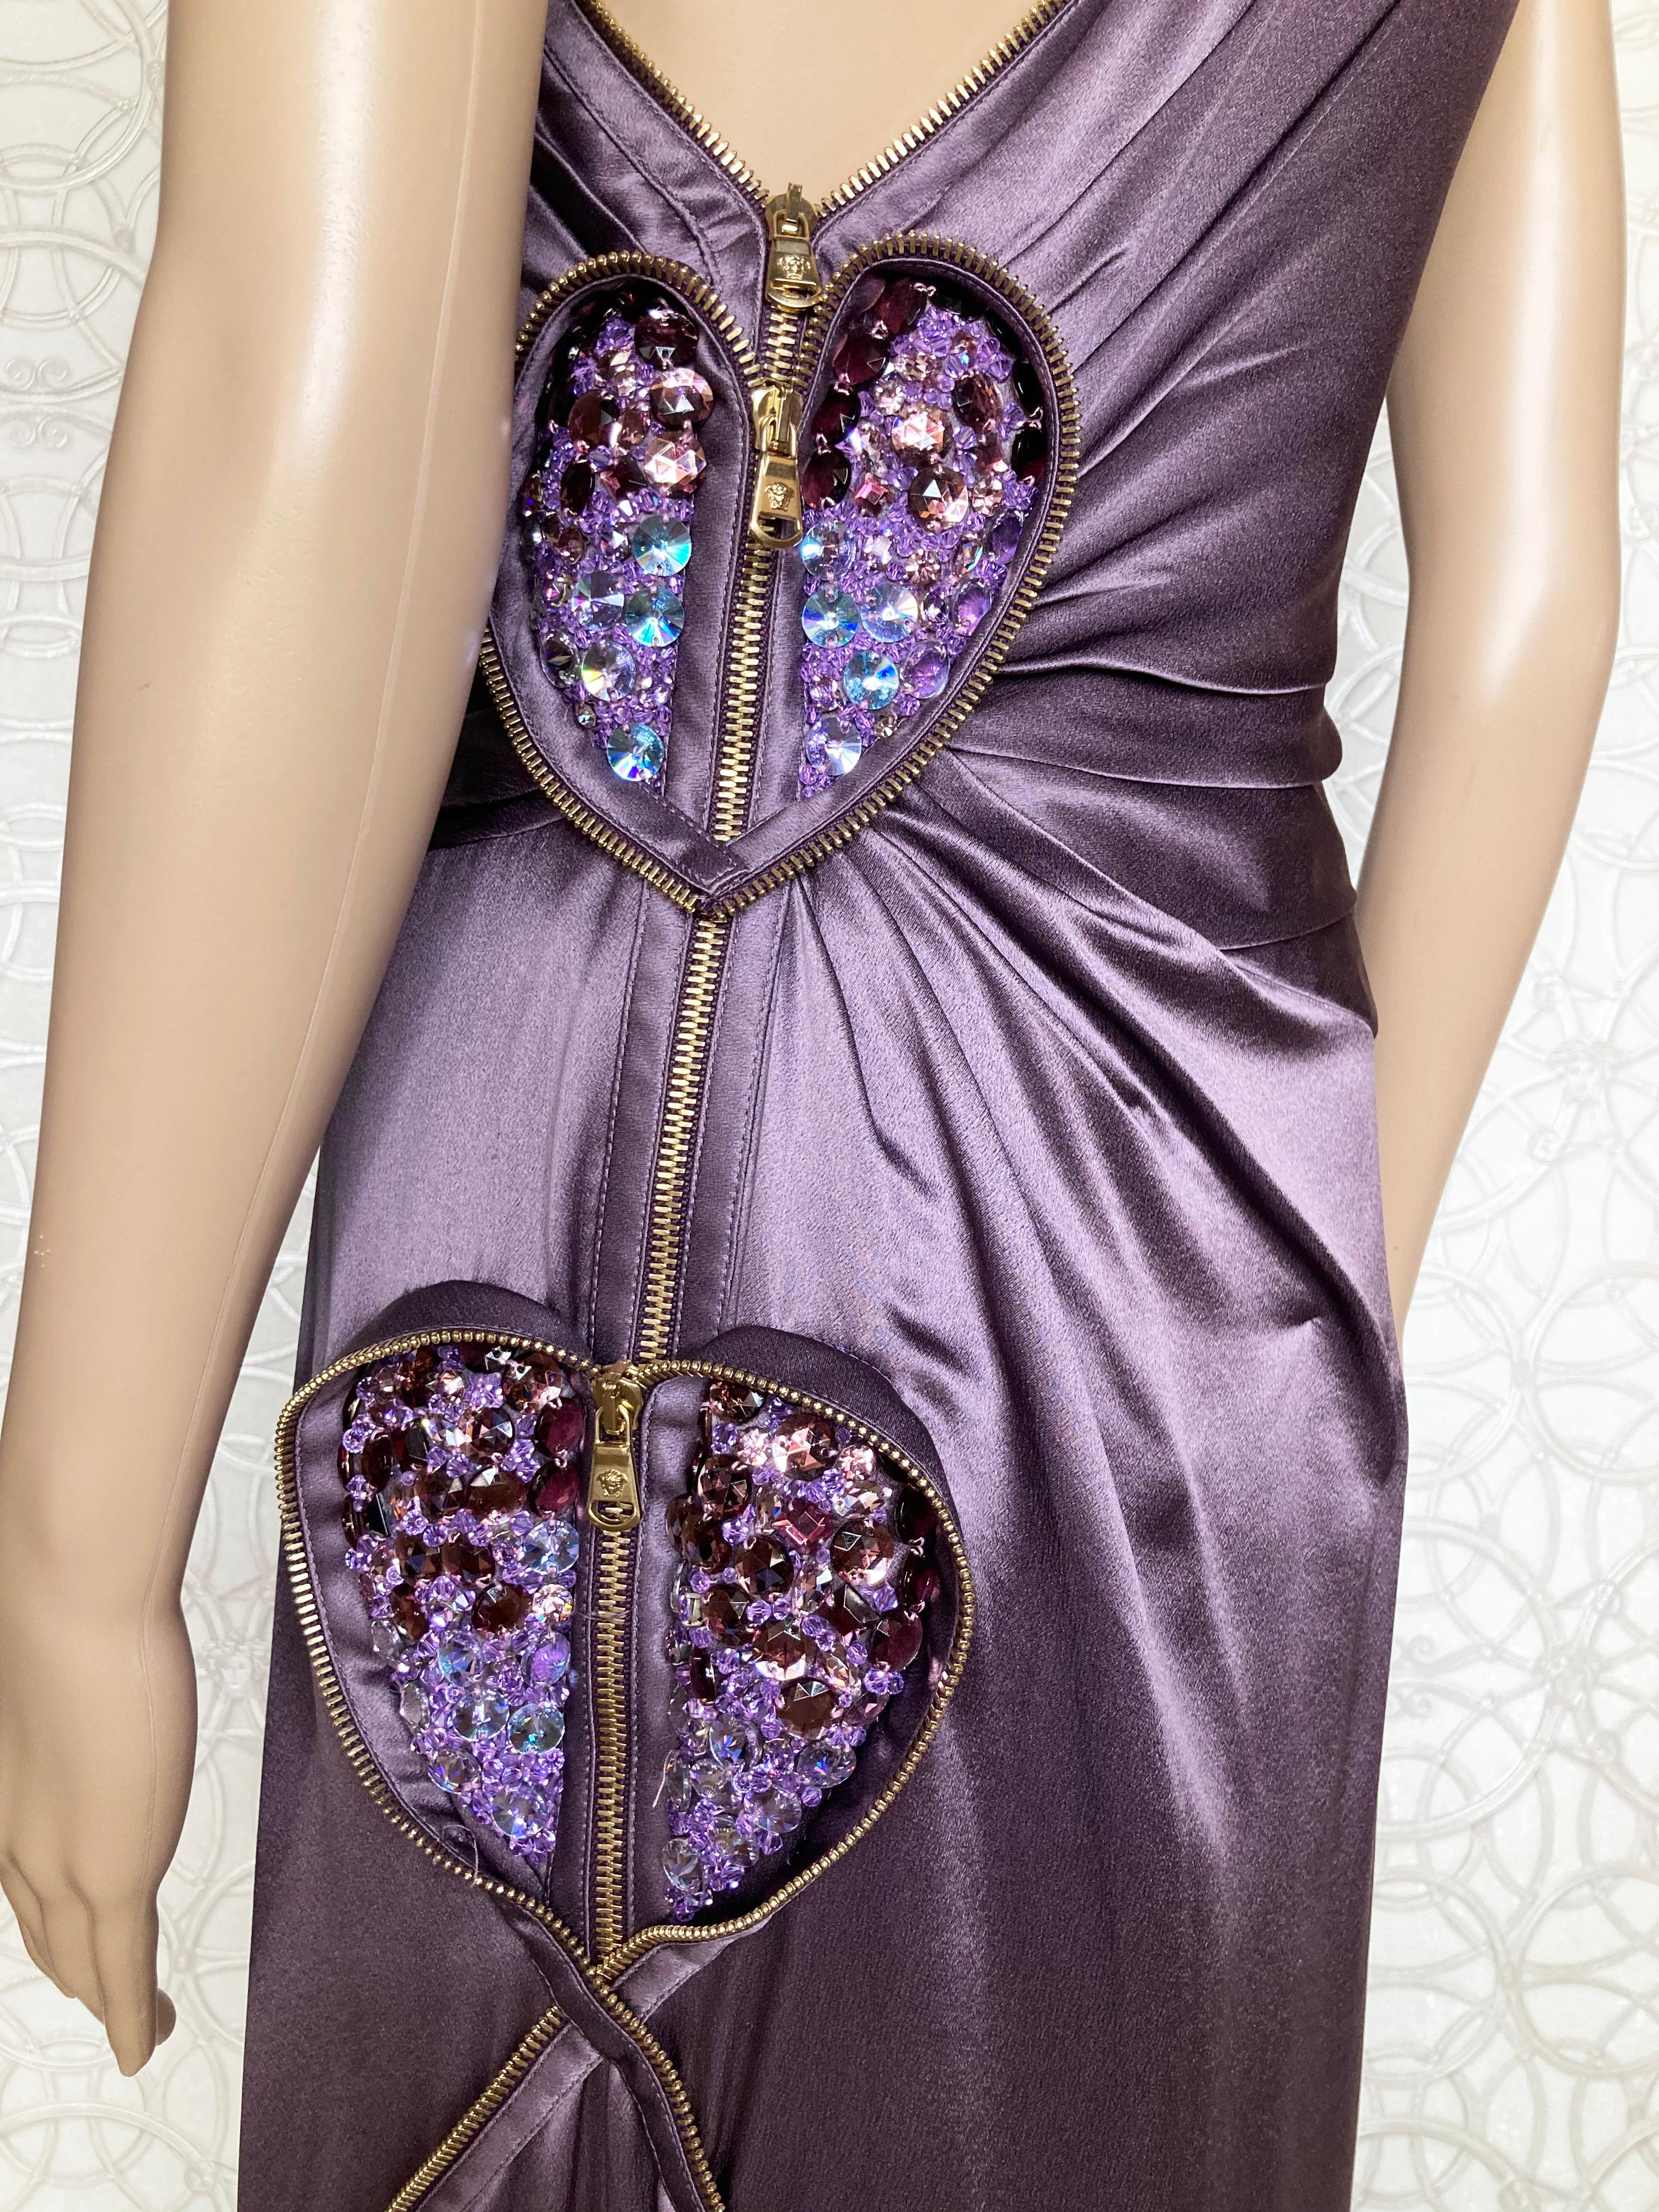 S/S 2009 L# 37 VERSACE ONE SHOULDER PURPLE LONG DRESS GOWN With HEARTS 46 - 10 For Sale 5